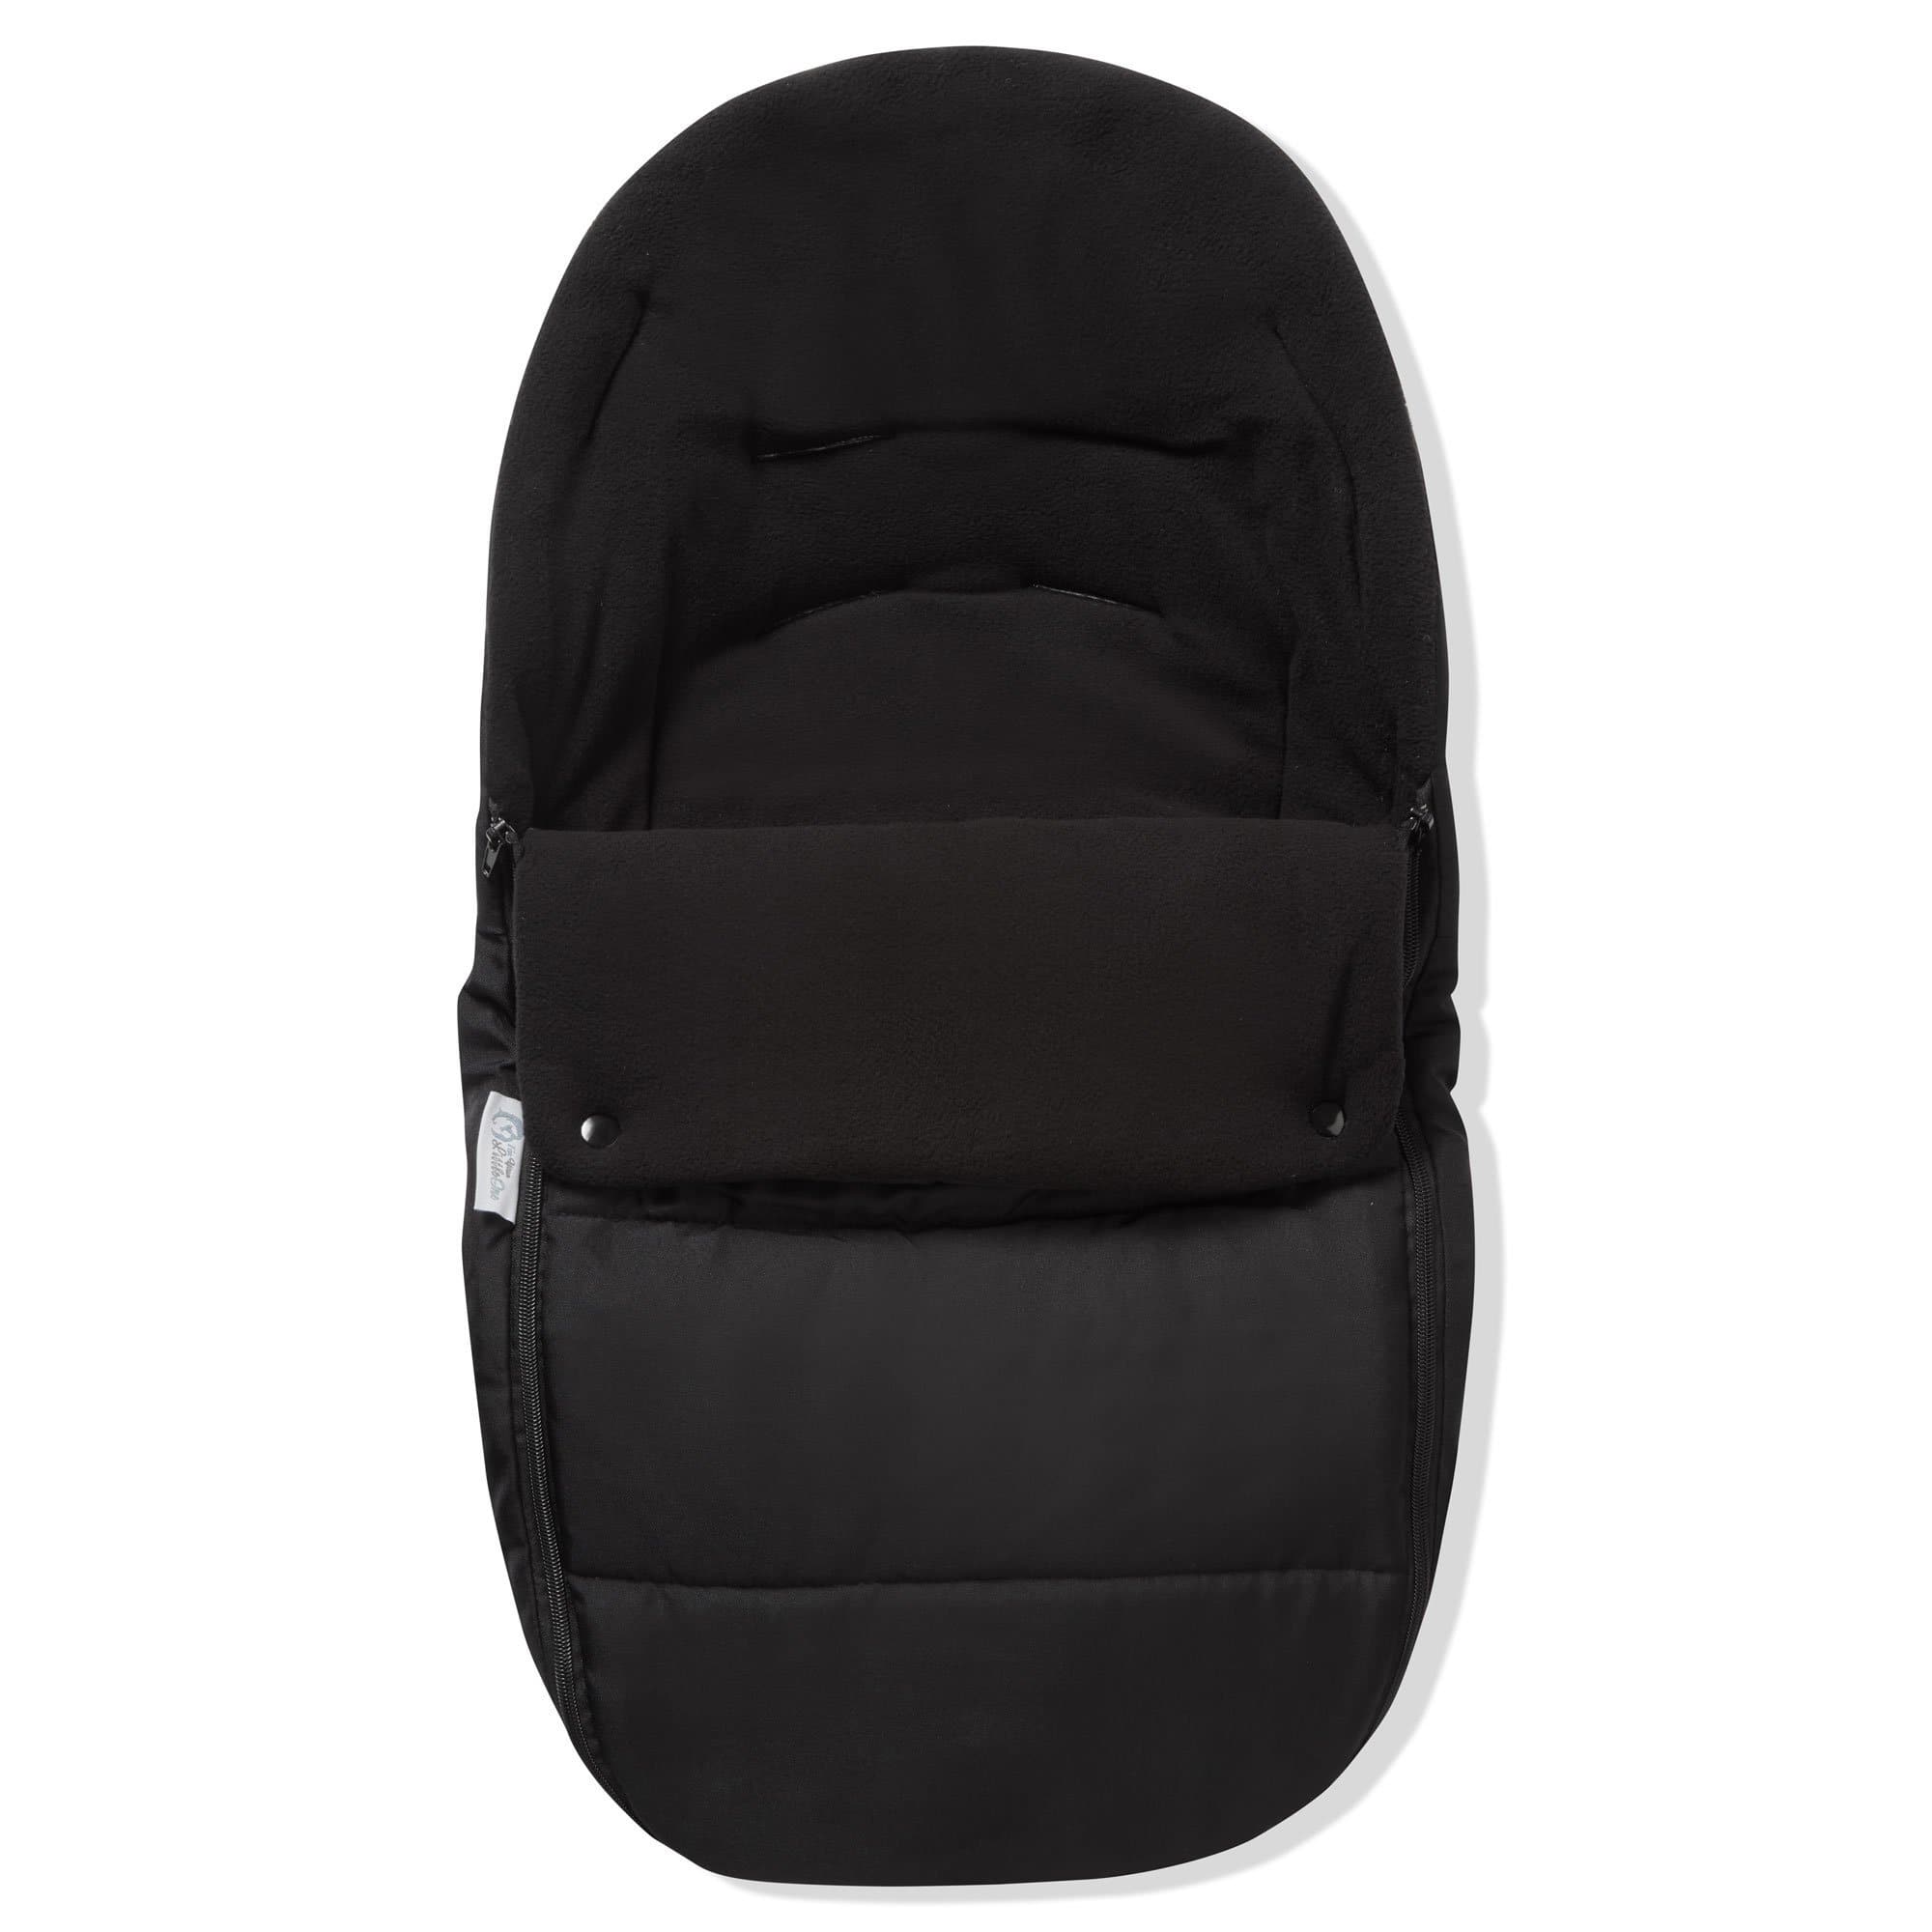 Premium Car Seat Footmuff / Cosy Toes Compatible with ABC Design - Black Jack / Fits All Models | For Your Little One